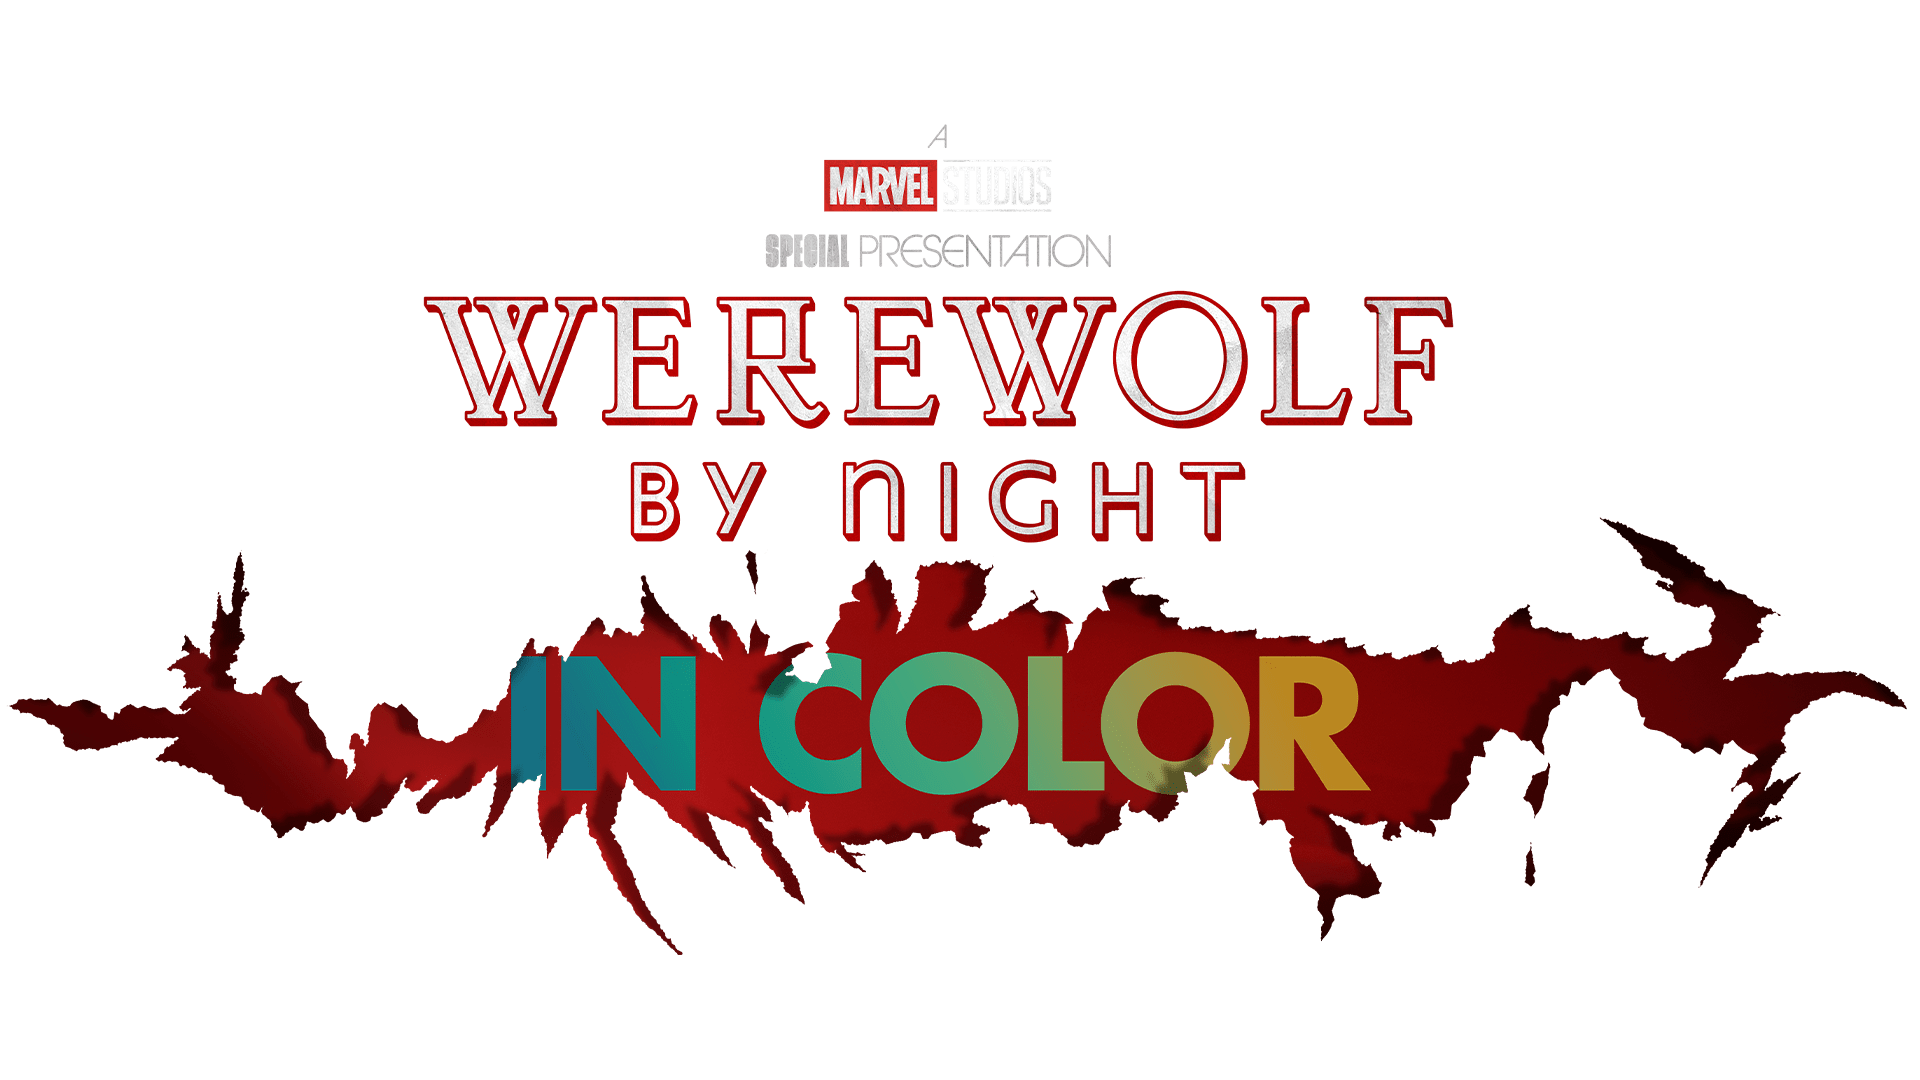 Werewolf by Night in Color full movie. Action film di Disney+ Hotstar.